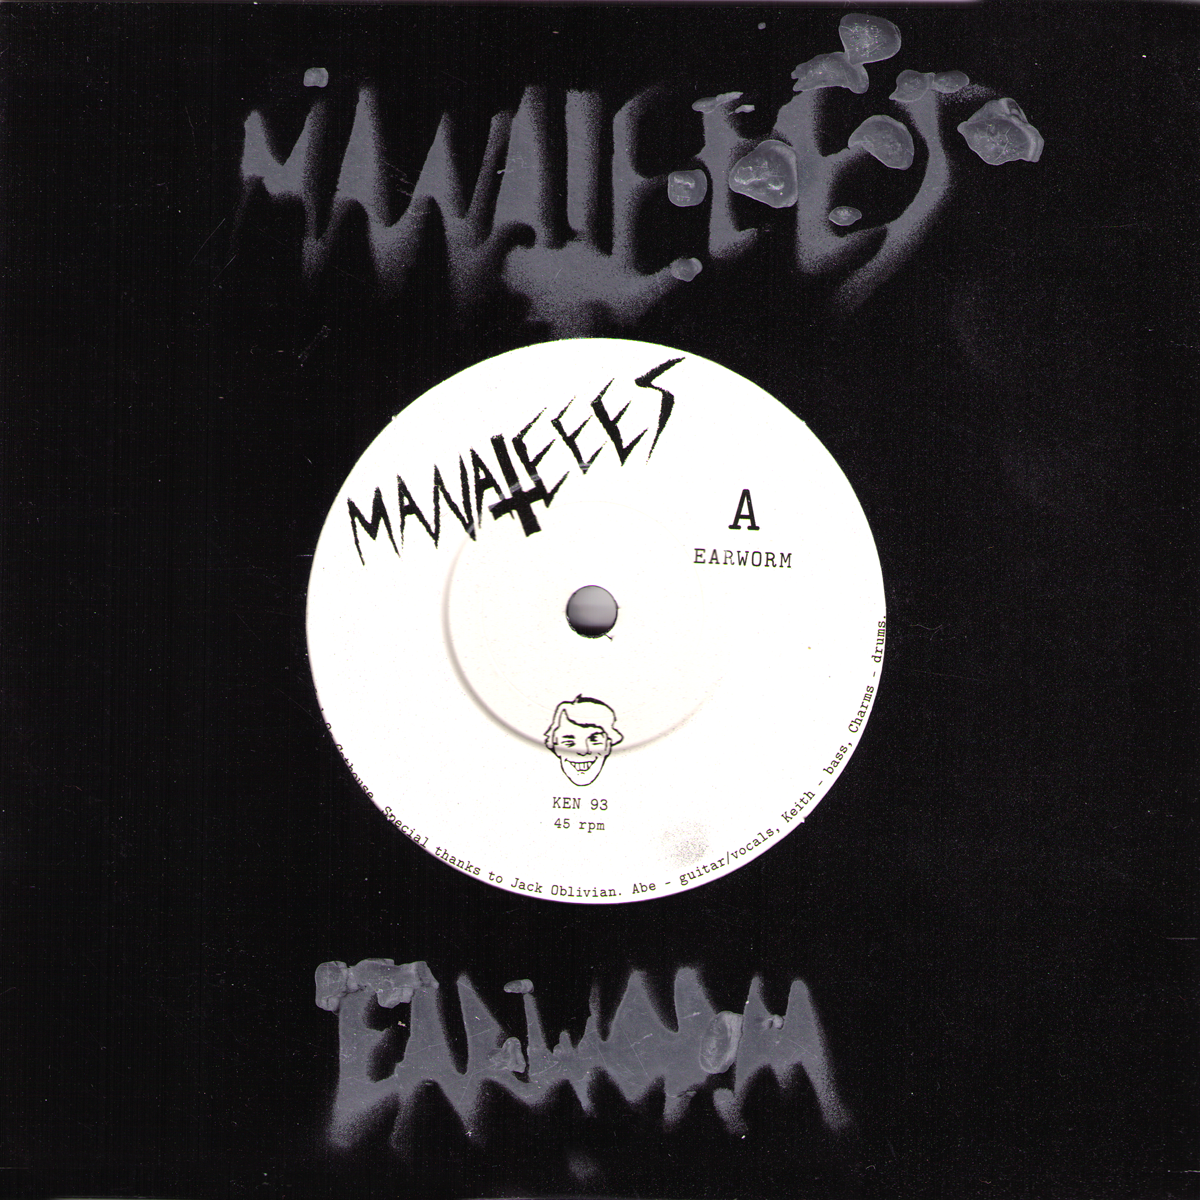 Manateees- Earworm 7” ~RARE SPRAY PAINTED COVERS!